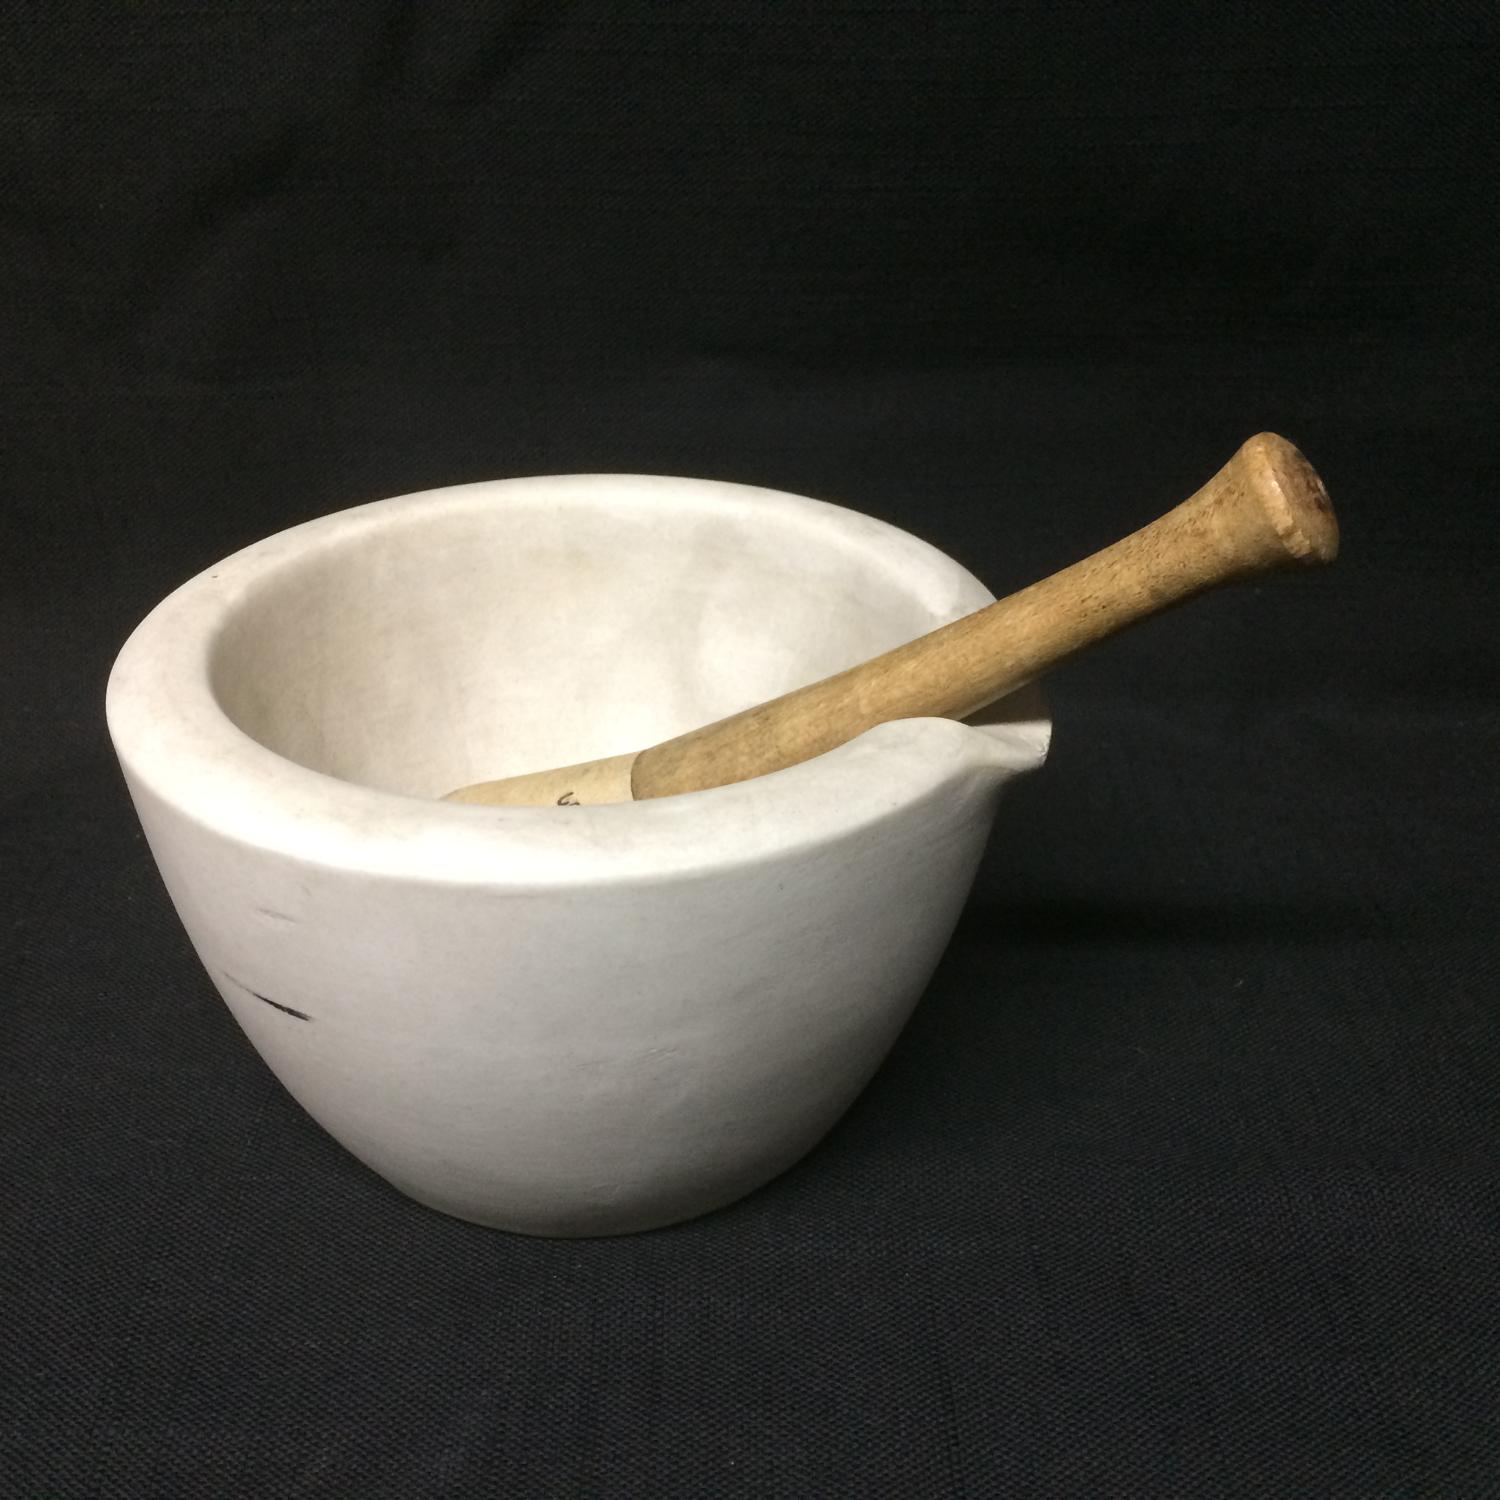 Early American Antique Miniature Stoneware Mortar and Pestle